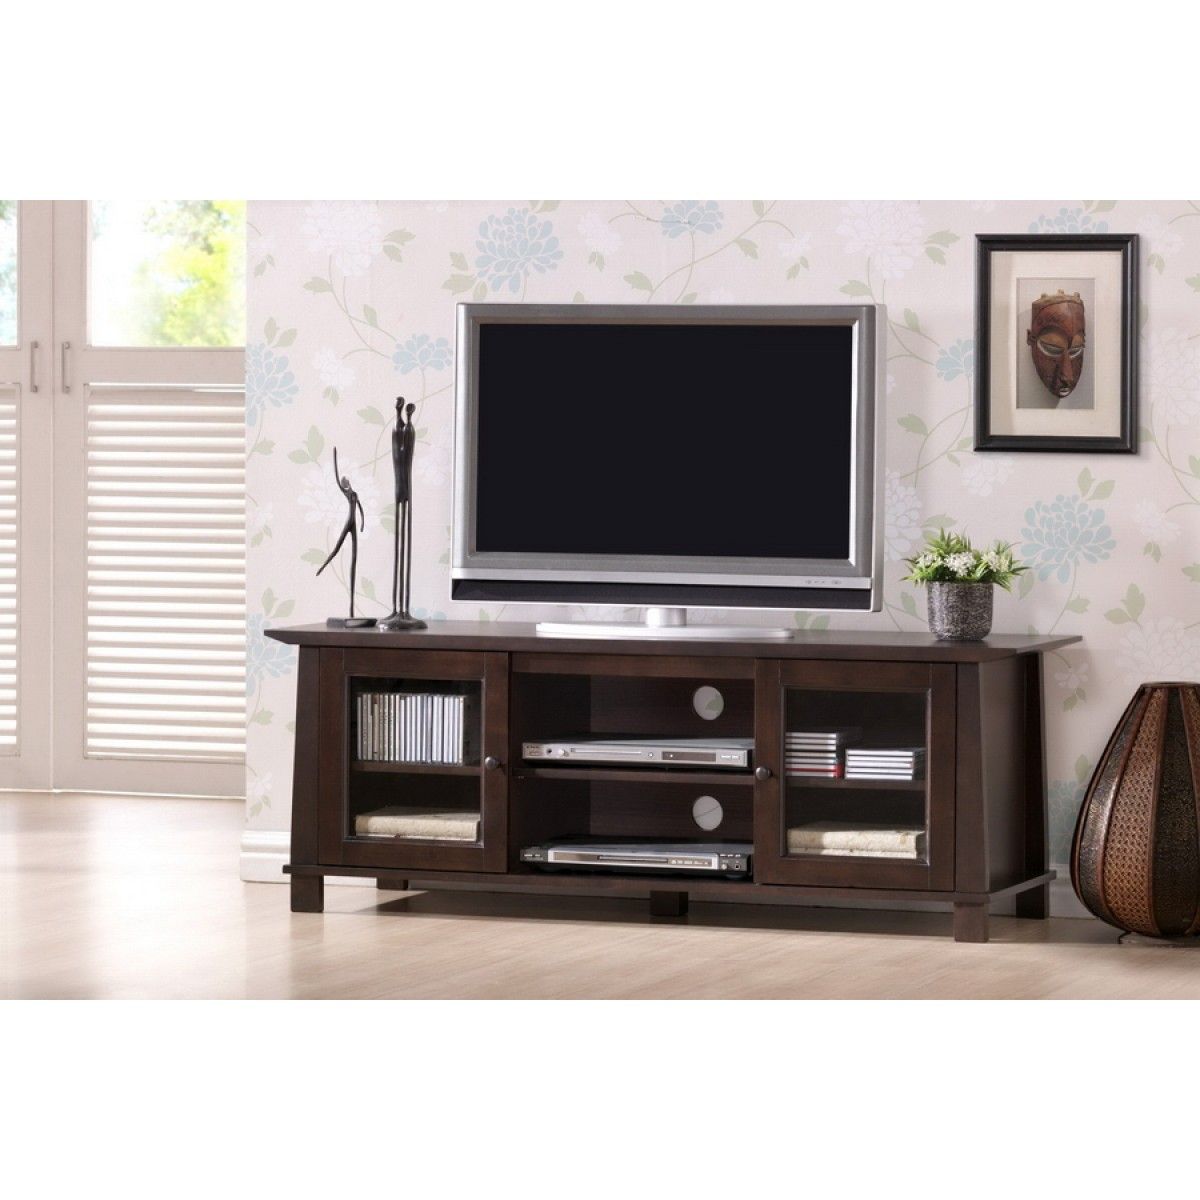 Havana Brown Wood Modern Tv Stand (plasma) | See White Intended For Tv Stands For Plasma Tv (View 2 of 15)